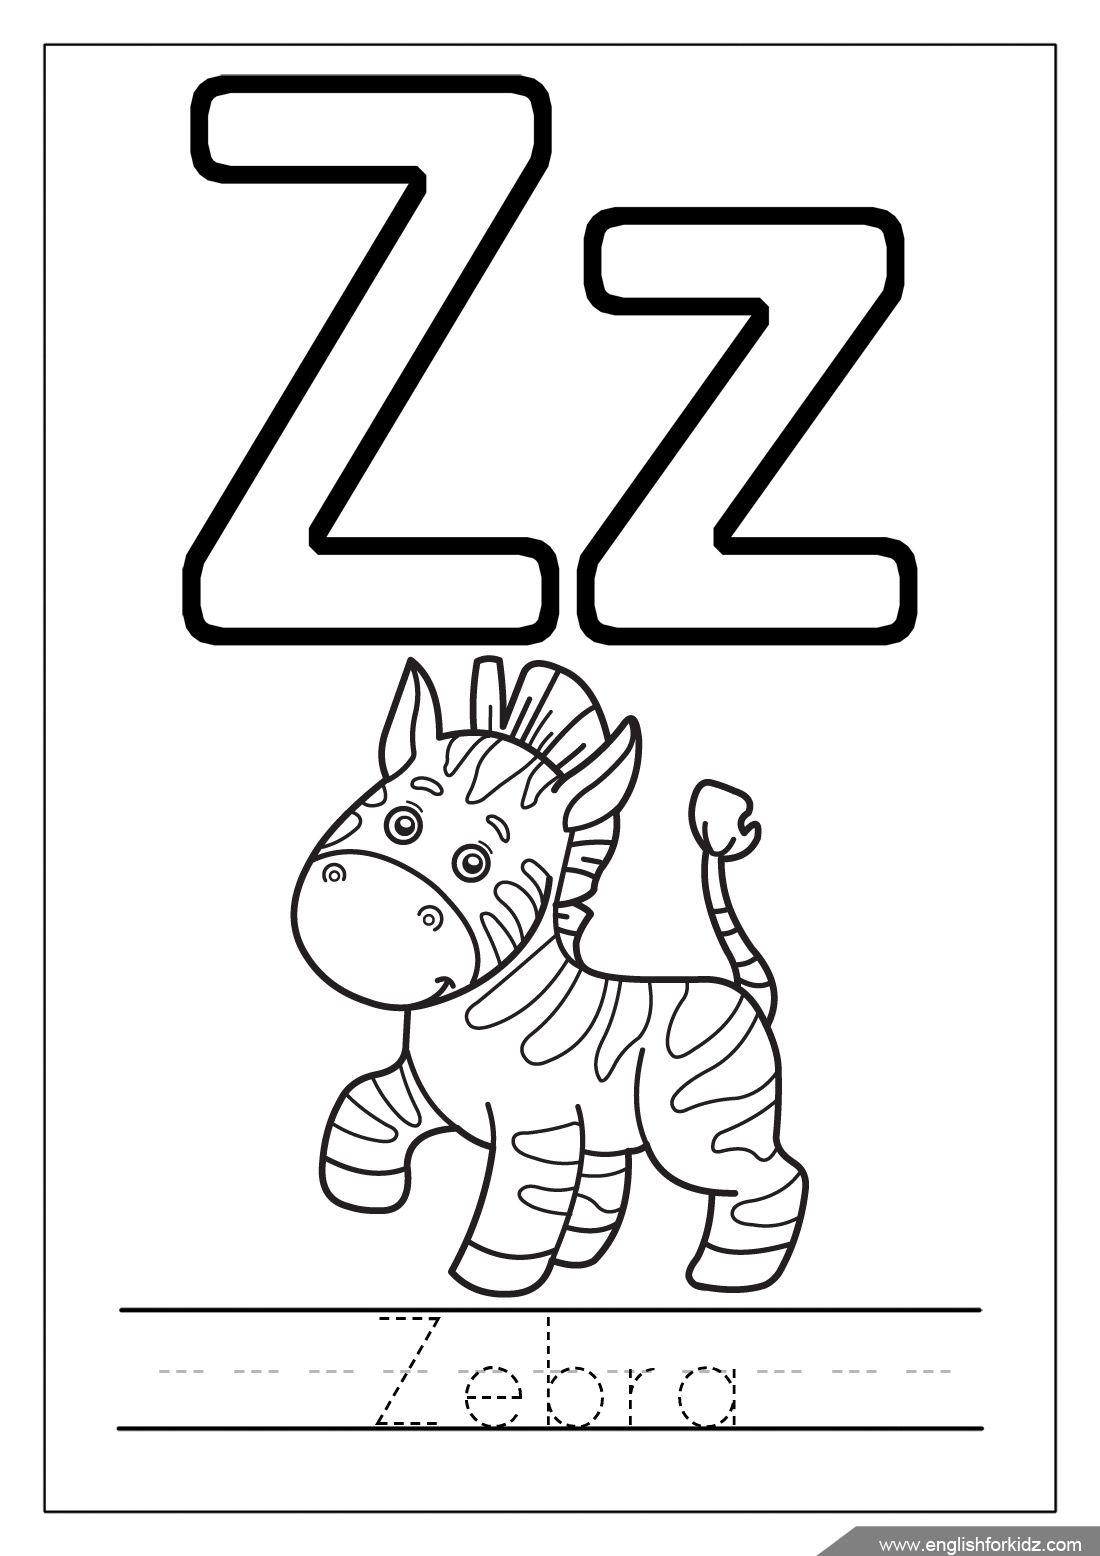 Letter Z Coloring Page at GetColorings.com | Free printable colorings